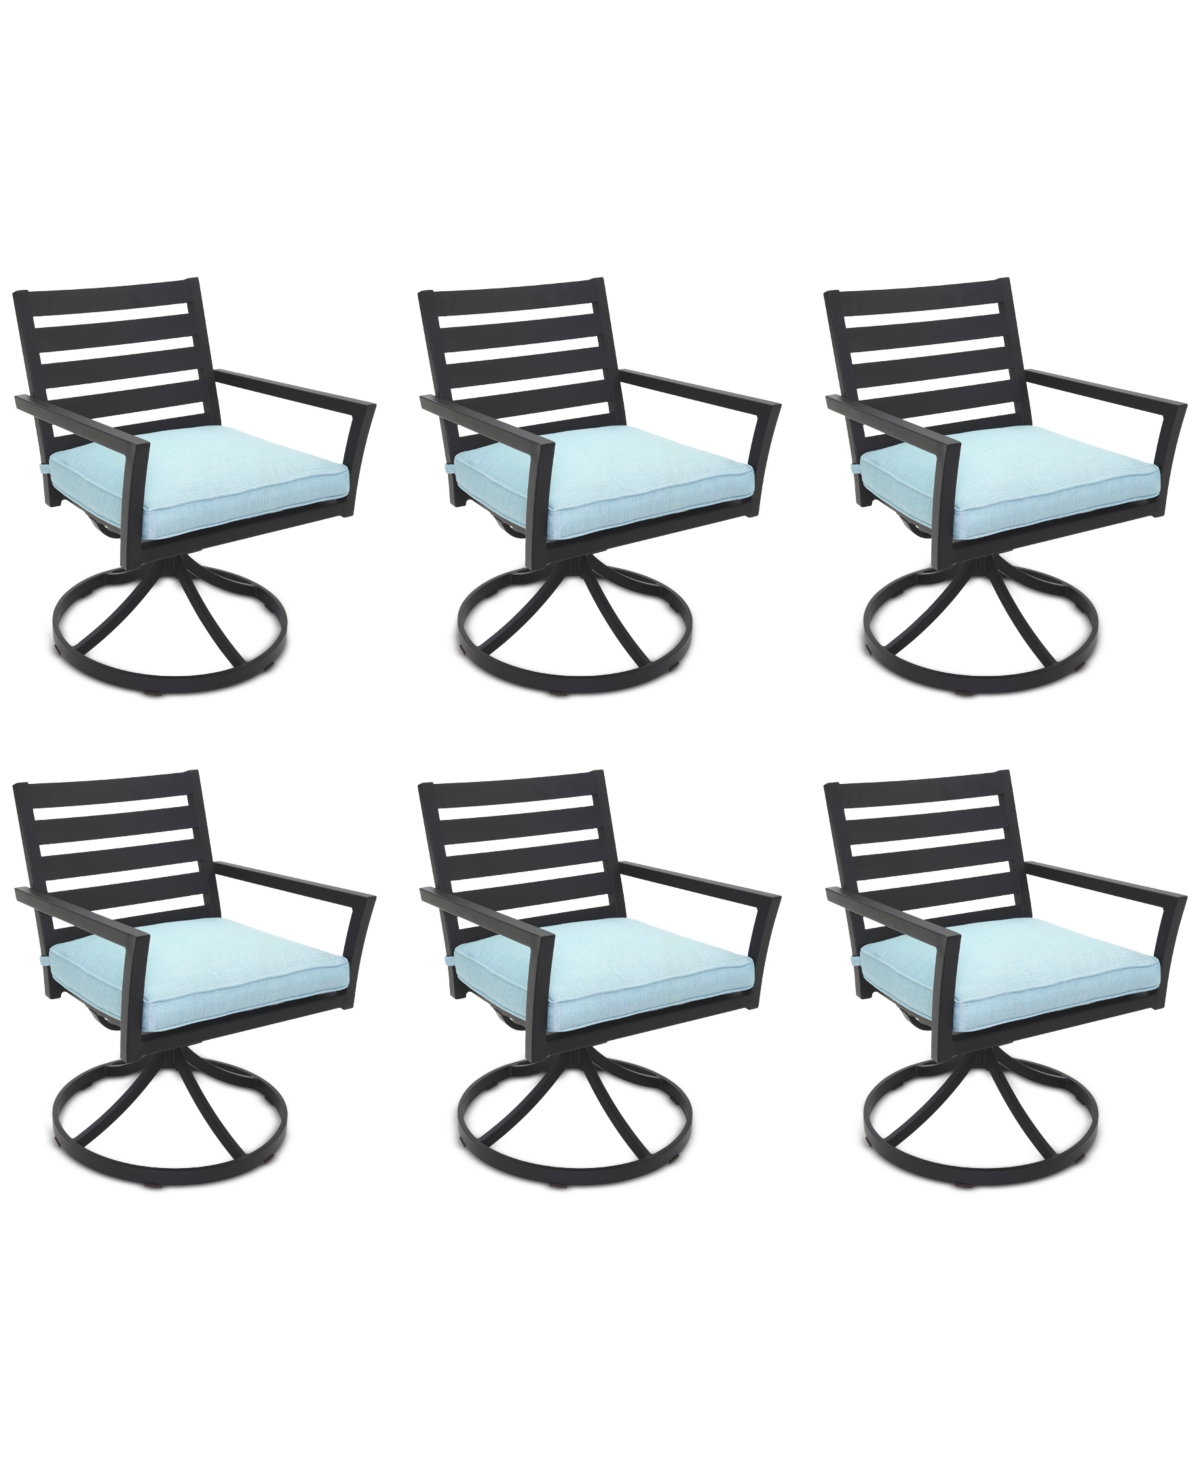 Agio Astaire Outdoor 6-pc Swivel Chair Bundle Set In Spa Light Blue